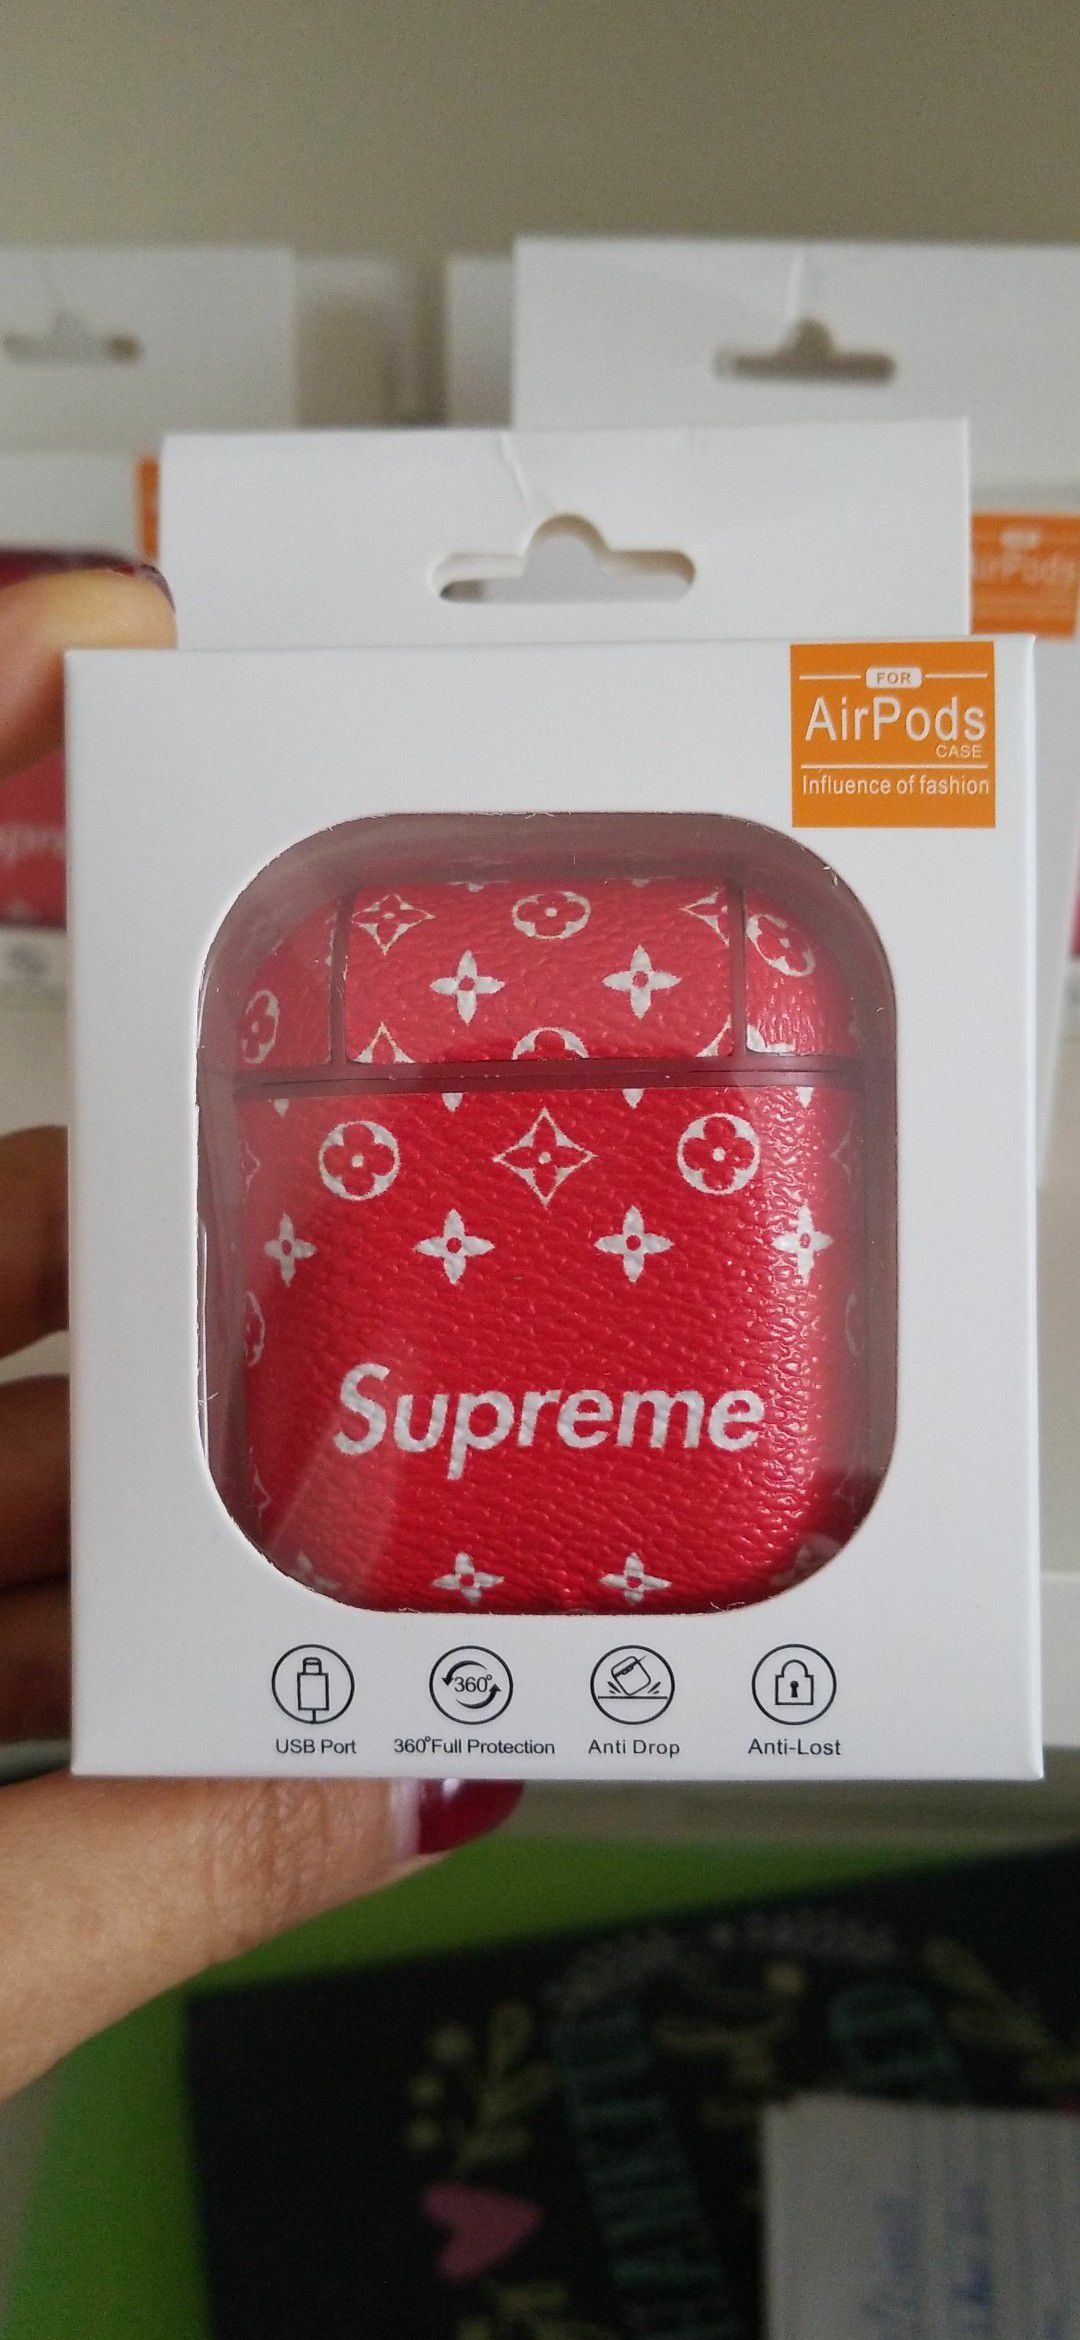 Airpods Supreme Red Color for IPhone